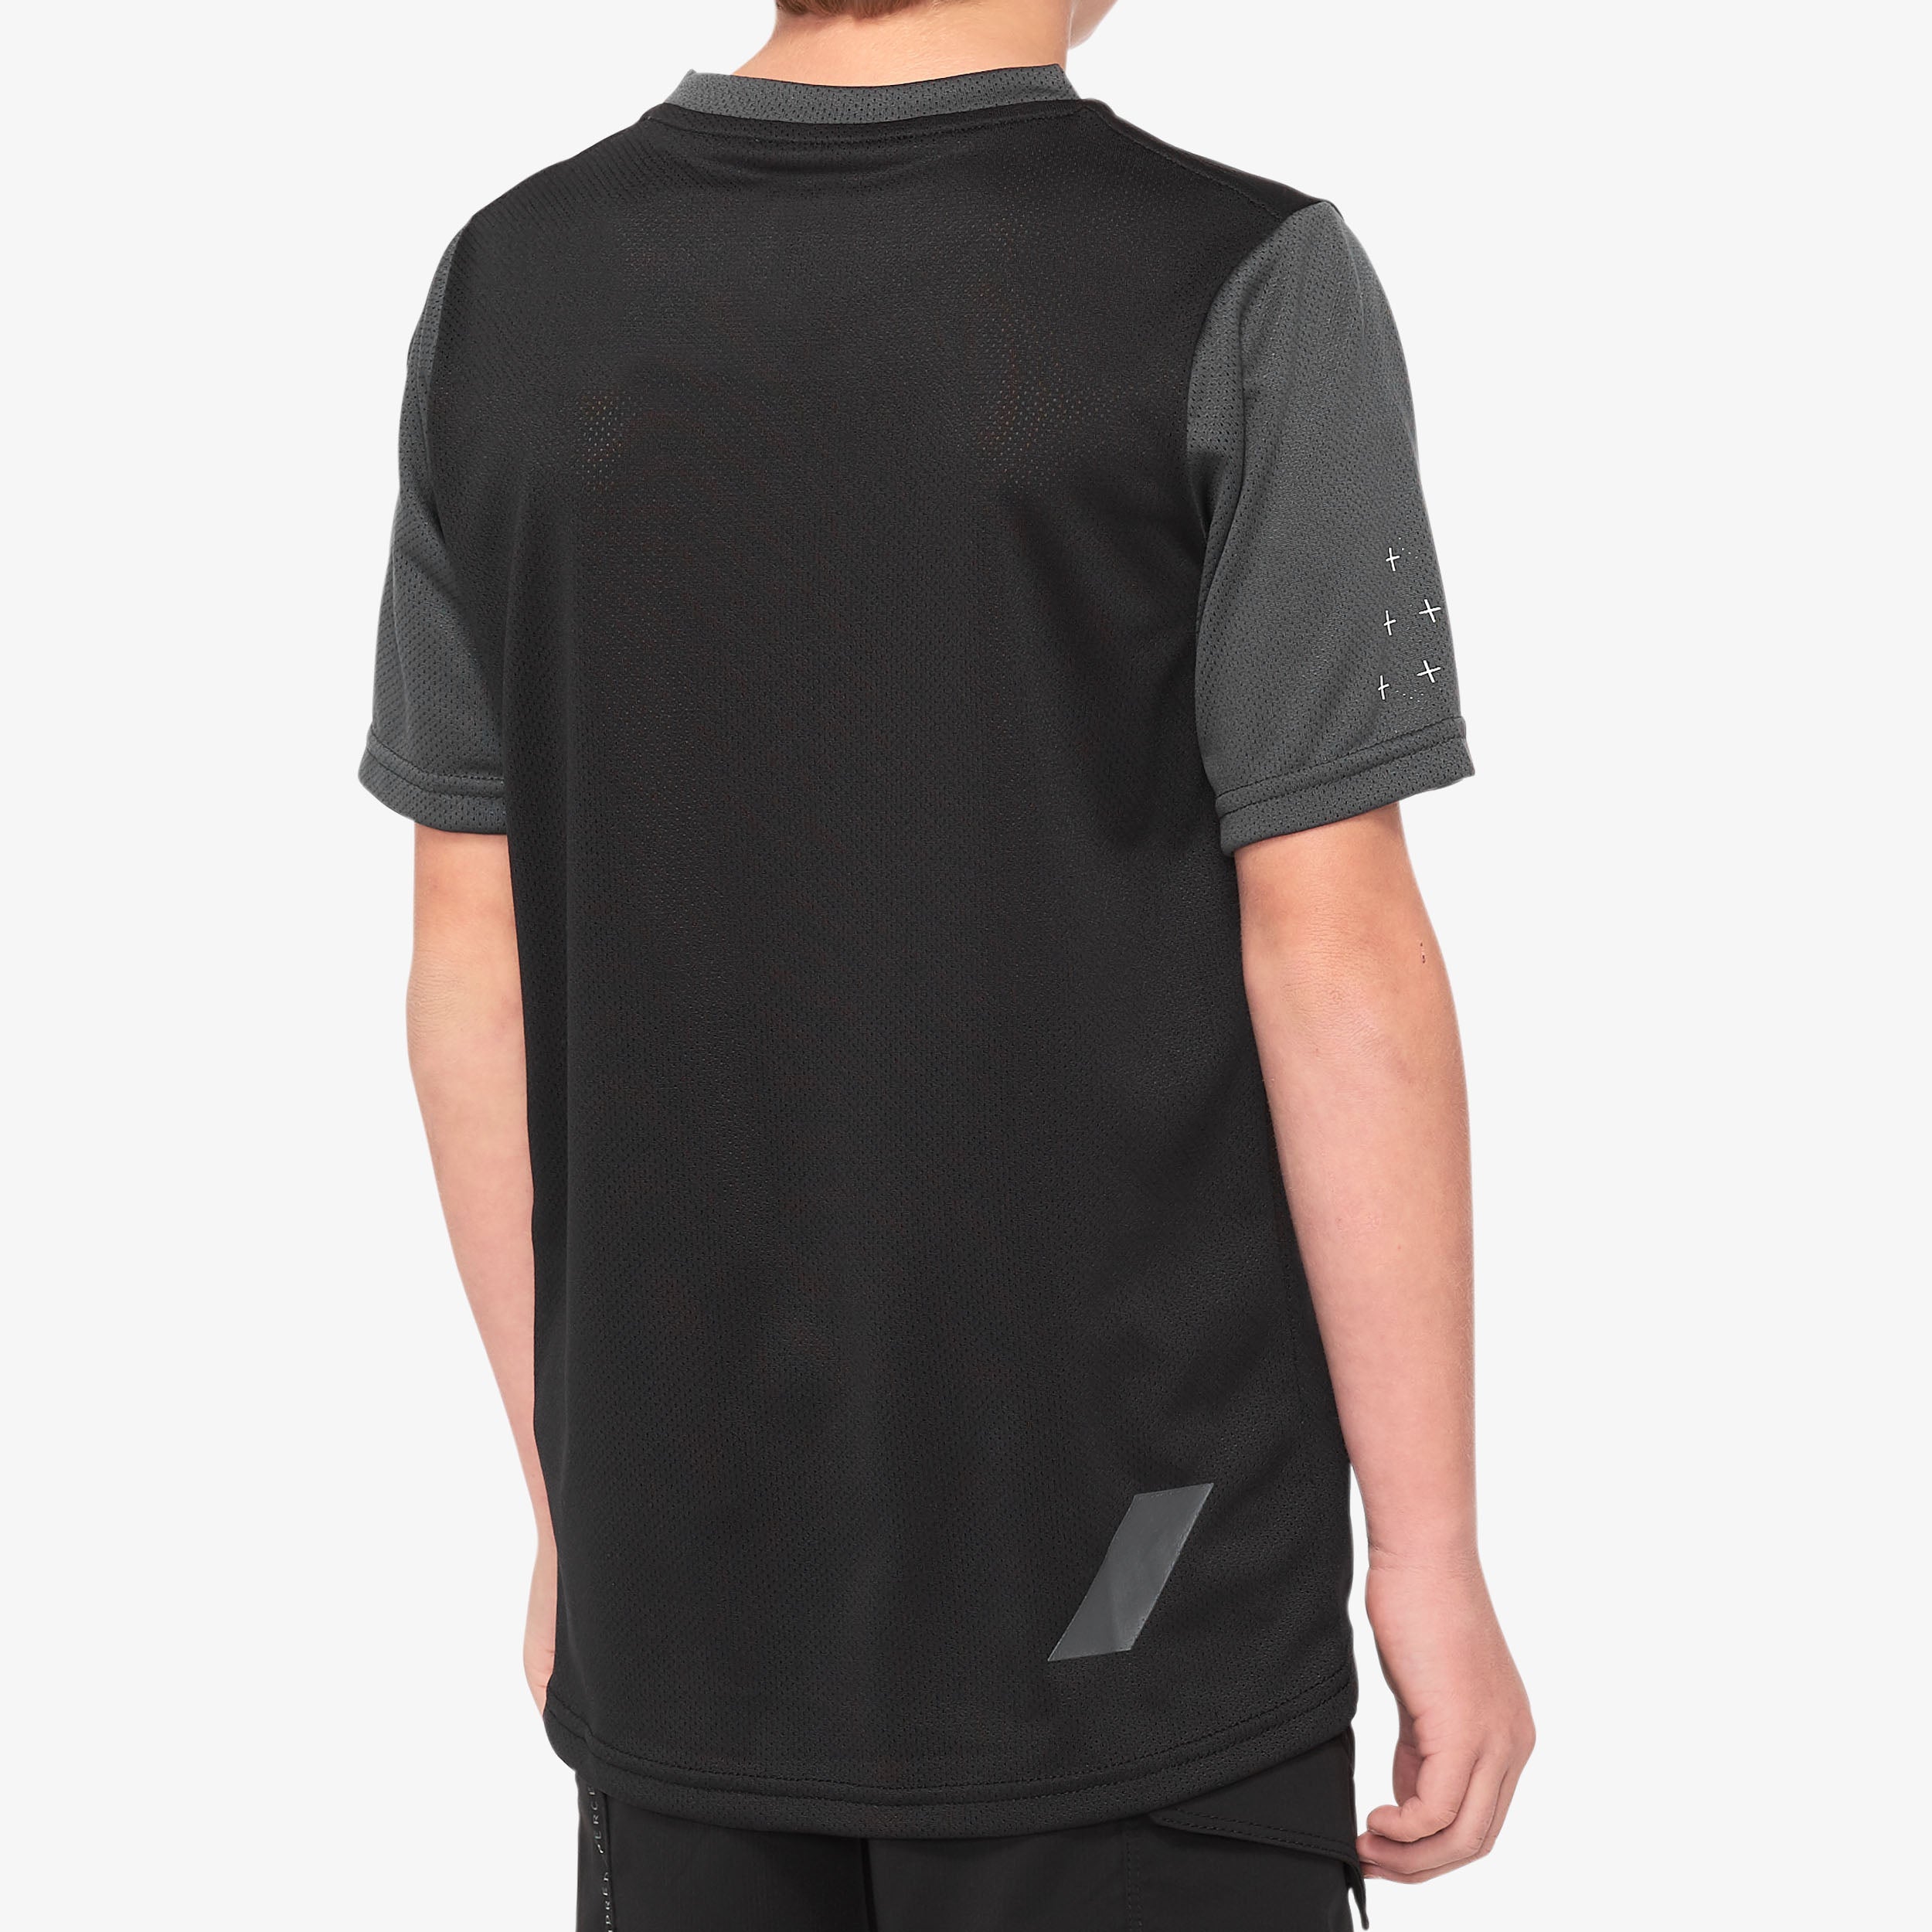 RIDECAMP Youth Jersey Black/Charcoal